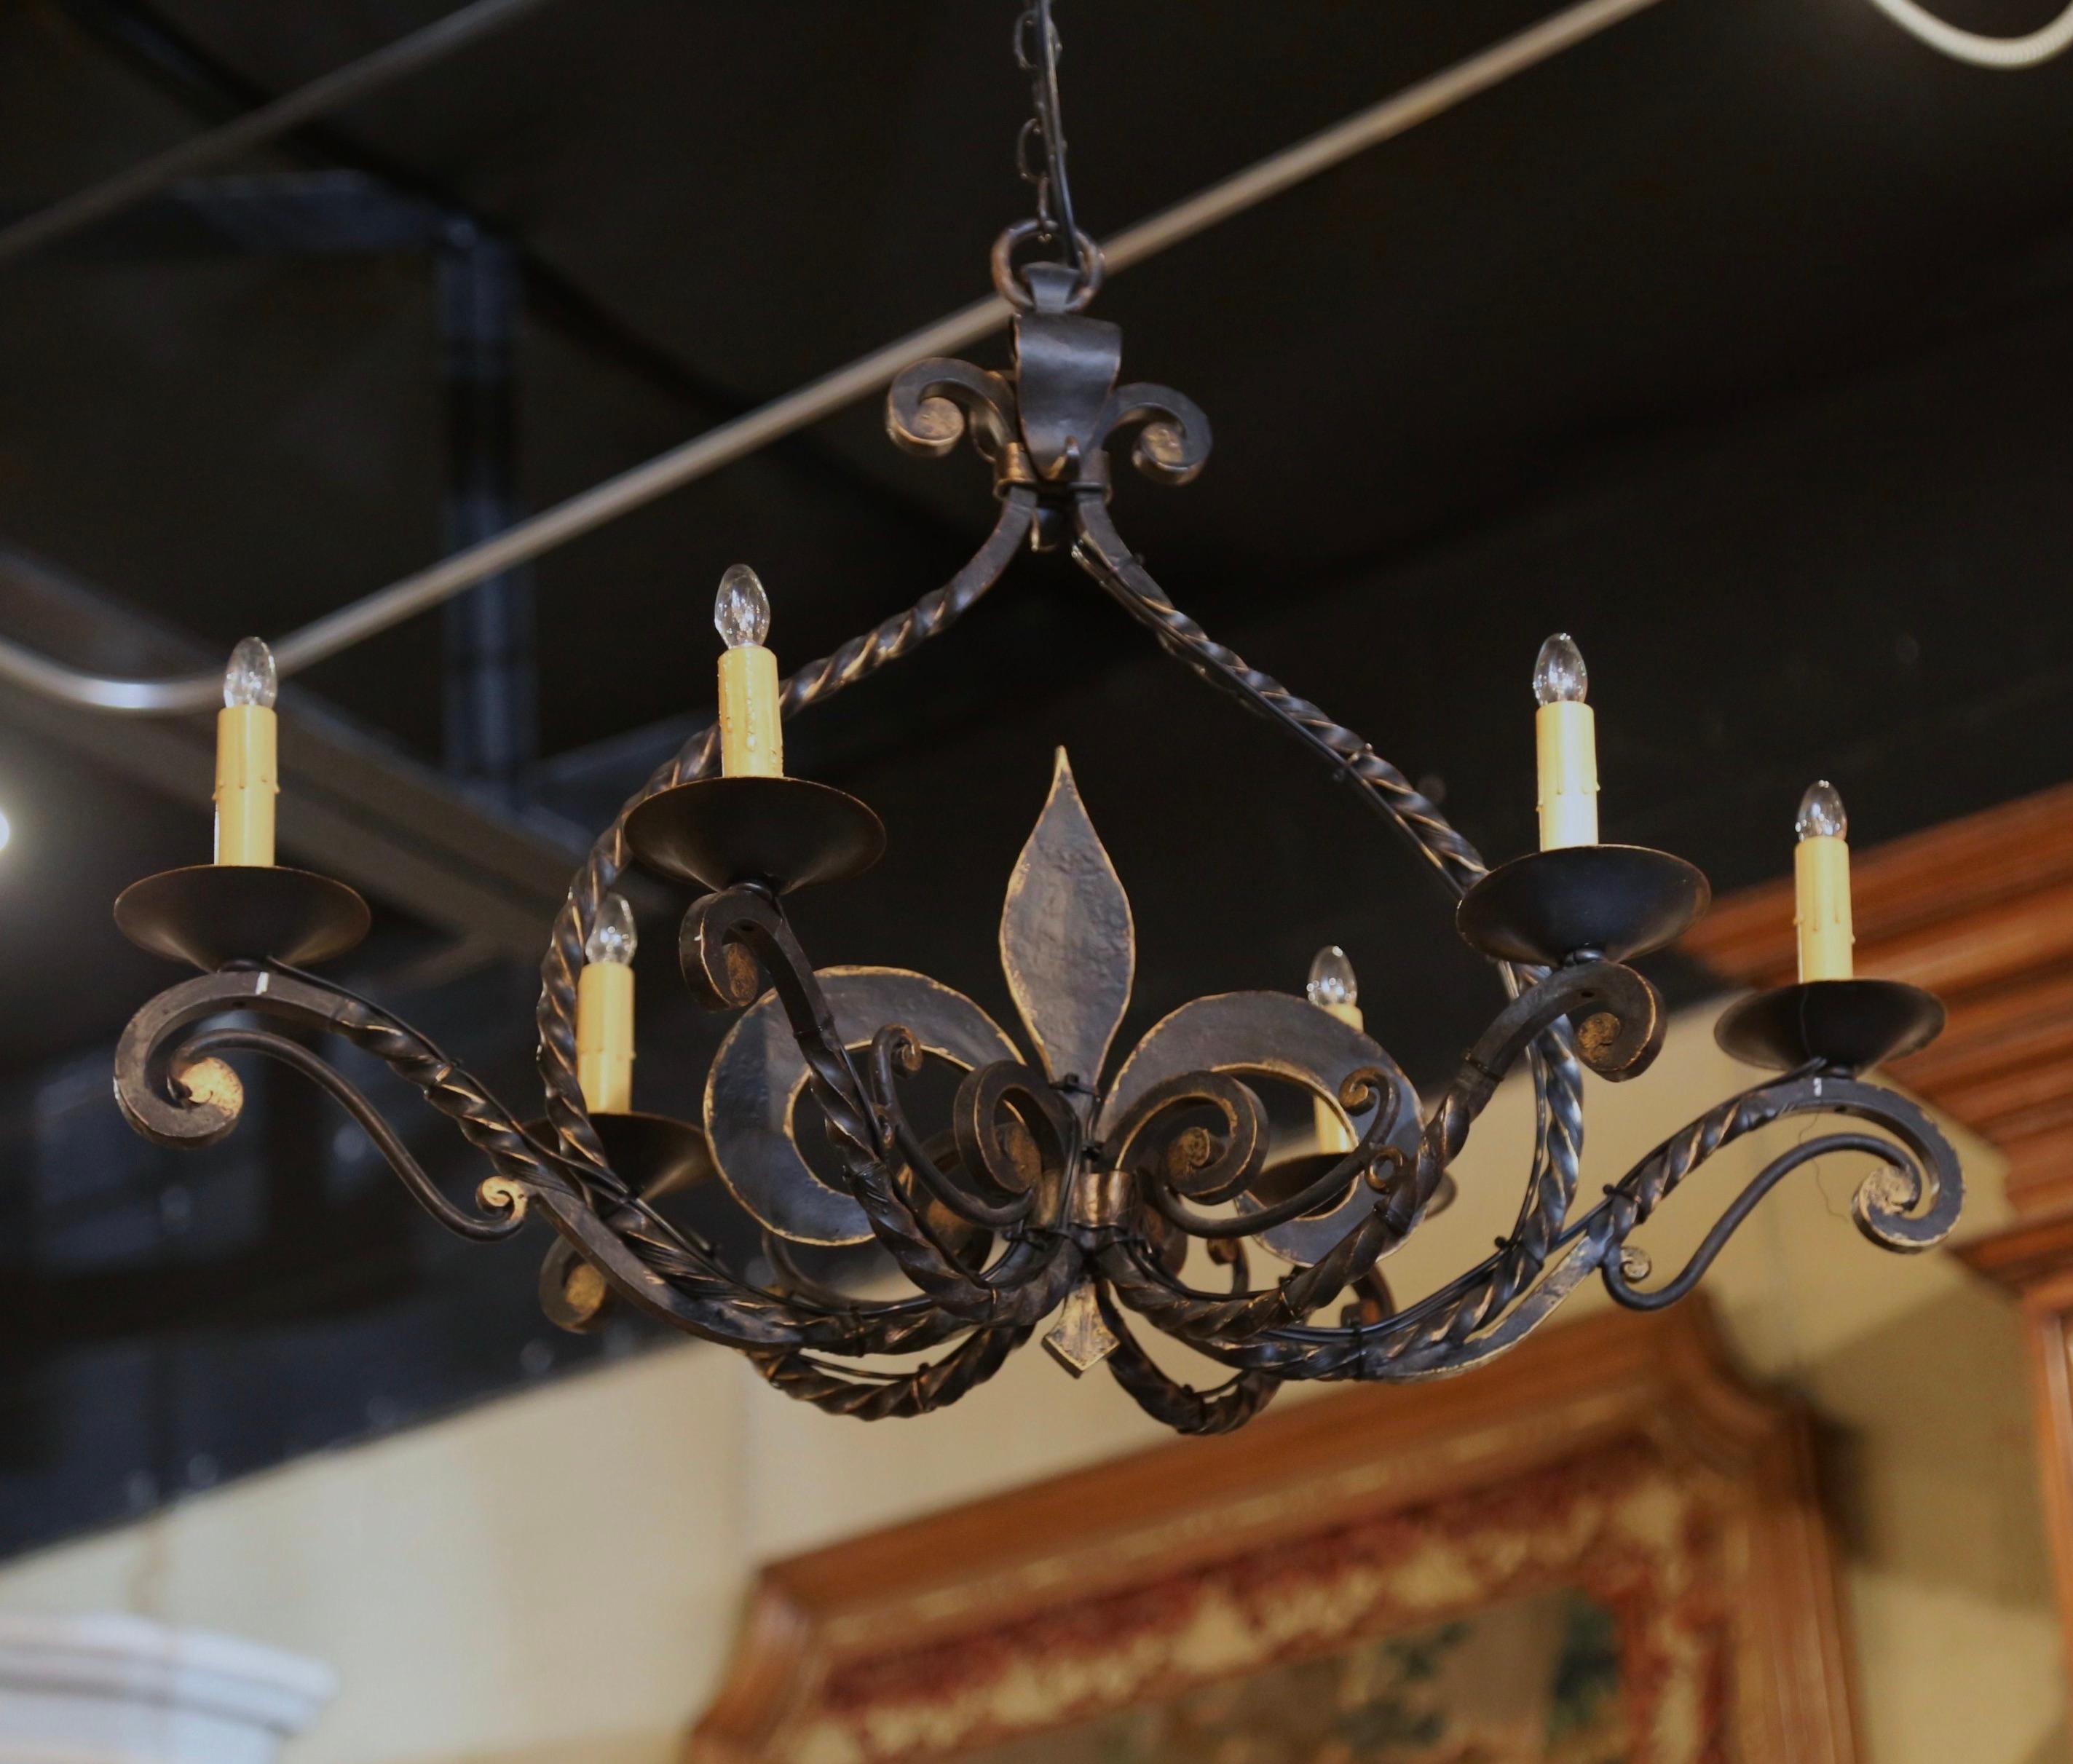 Add a touch of Gothic style to your house with this elegant light fixture. Forged in Normandy, France circa 1920, and oblong in shape, the antique chandelier features a large hand forged Fleur-de-Lys motif in the center; it has six lights newly